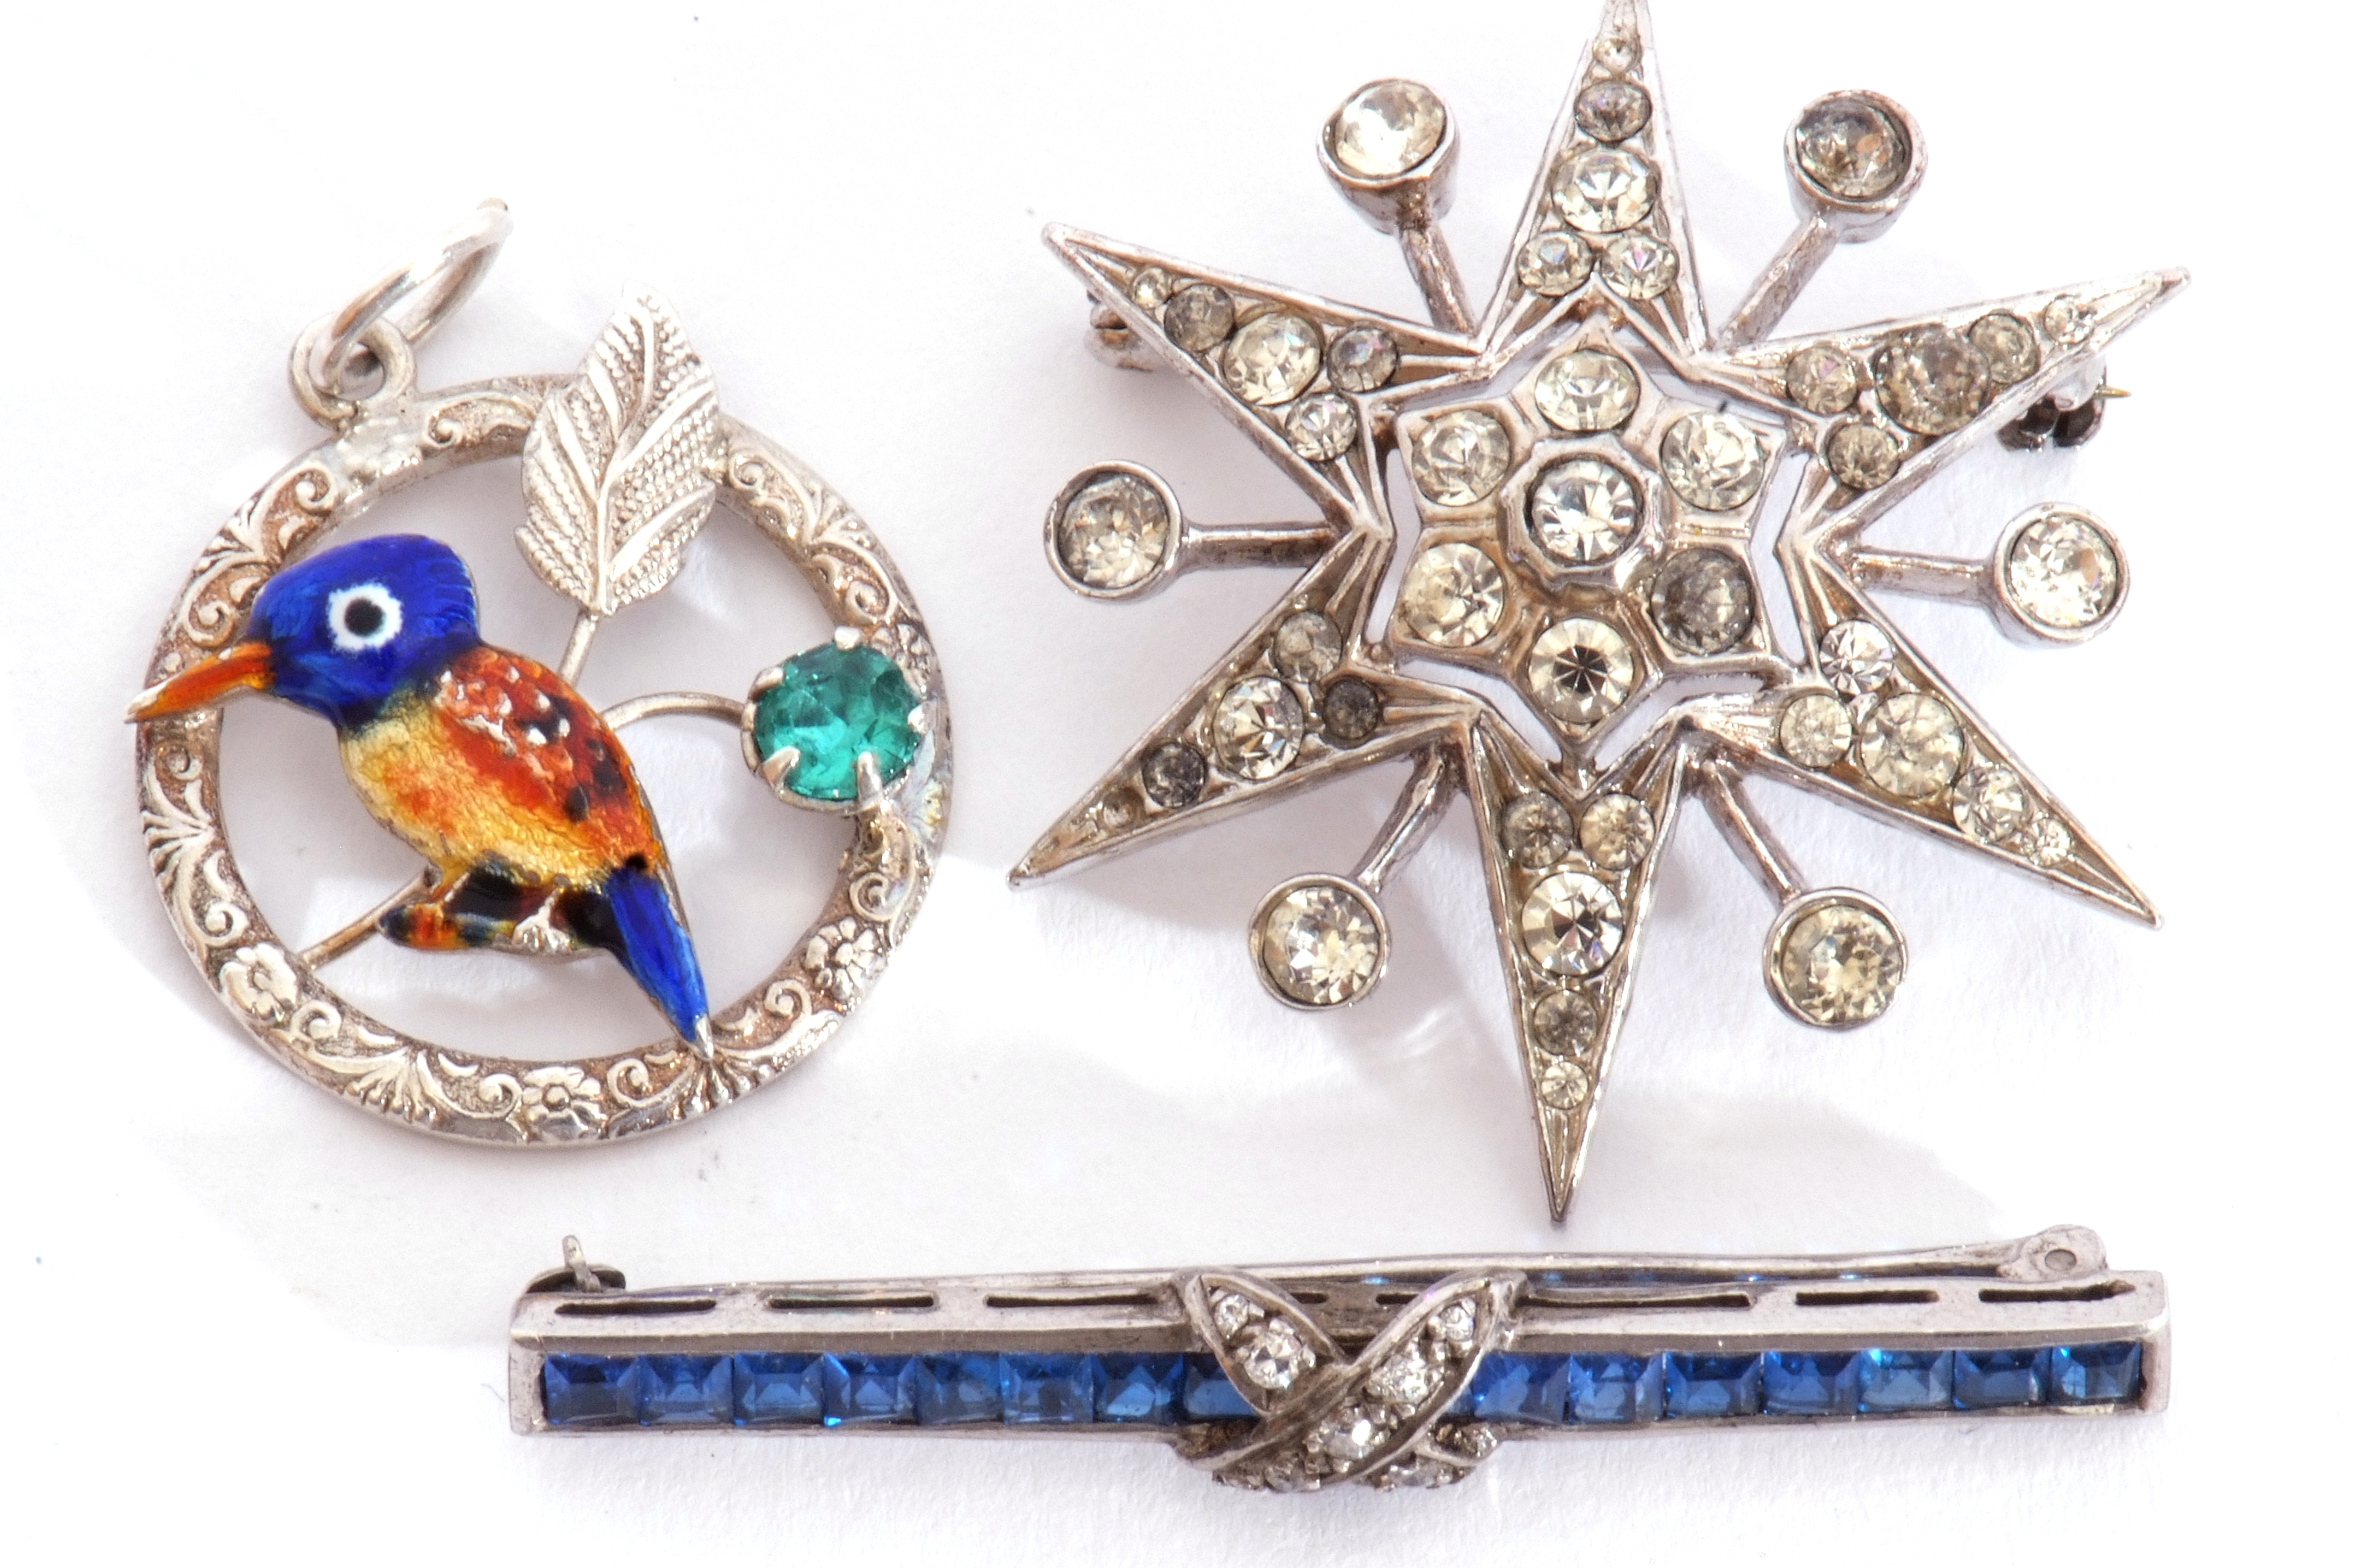 Mixed Lot: hallmarked silver and paste set star brooch, enamel decorated bird open pendant, - Image 2 of 2